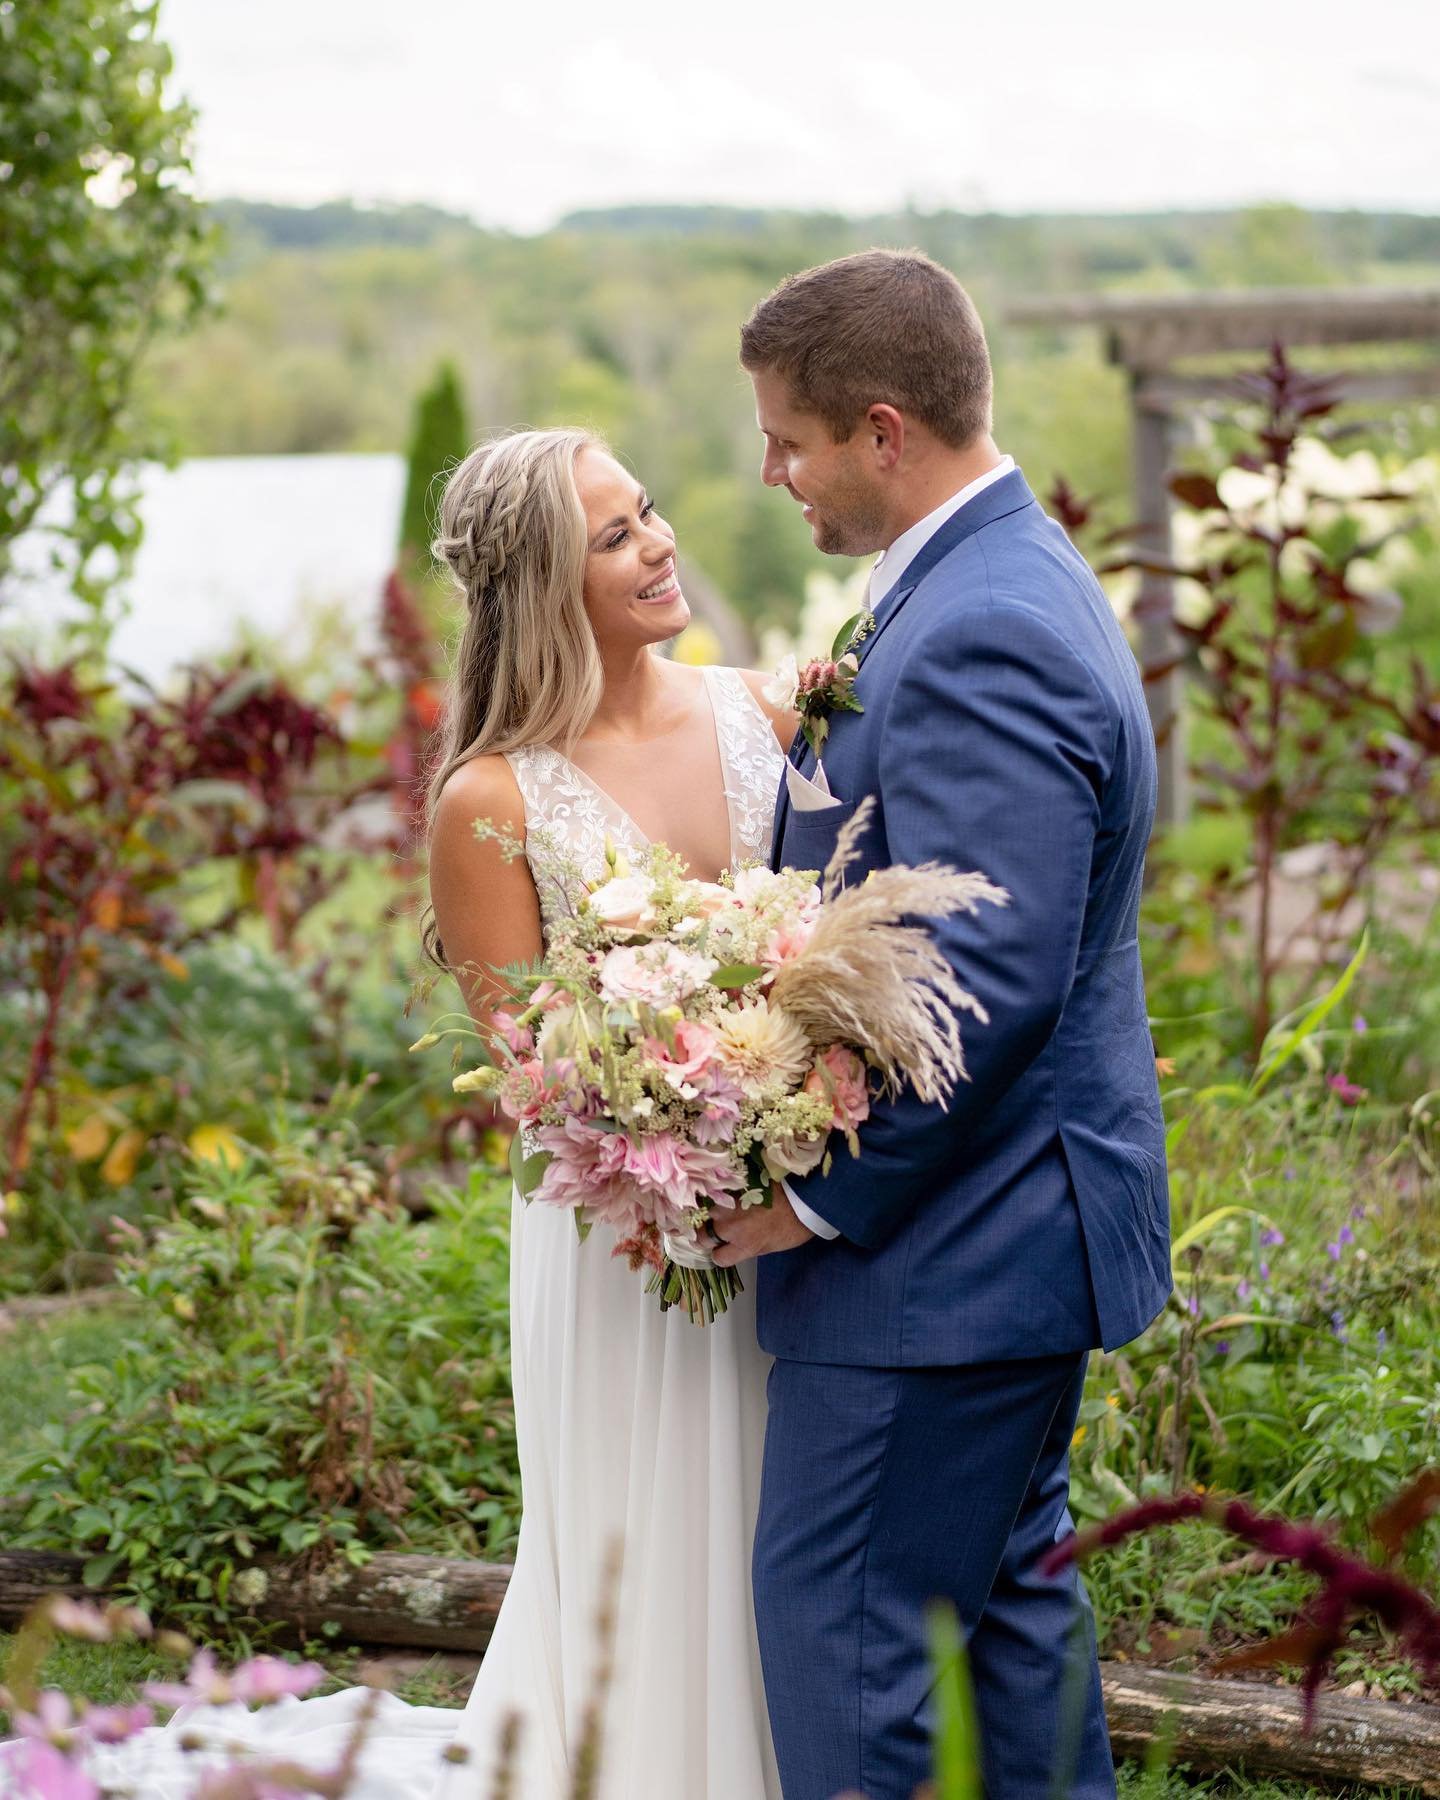 Bride & Groom in the Gardens at Fox Hill Farm in Honesdale PA.jpg